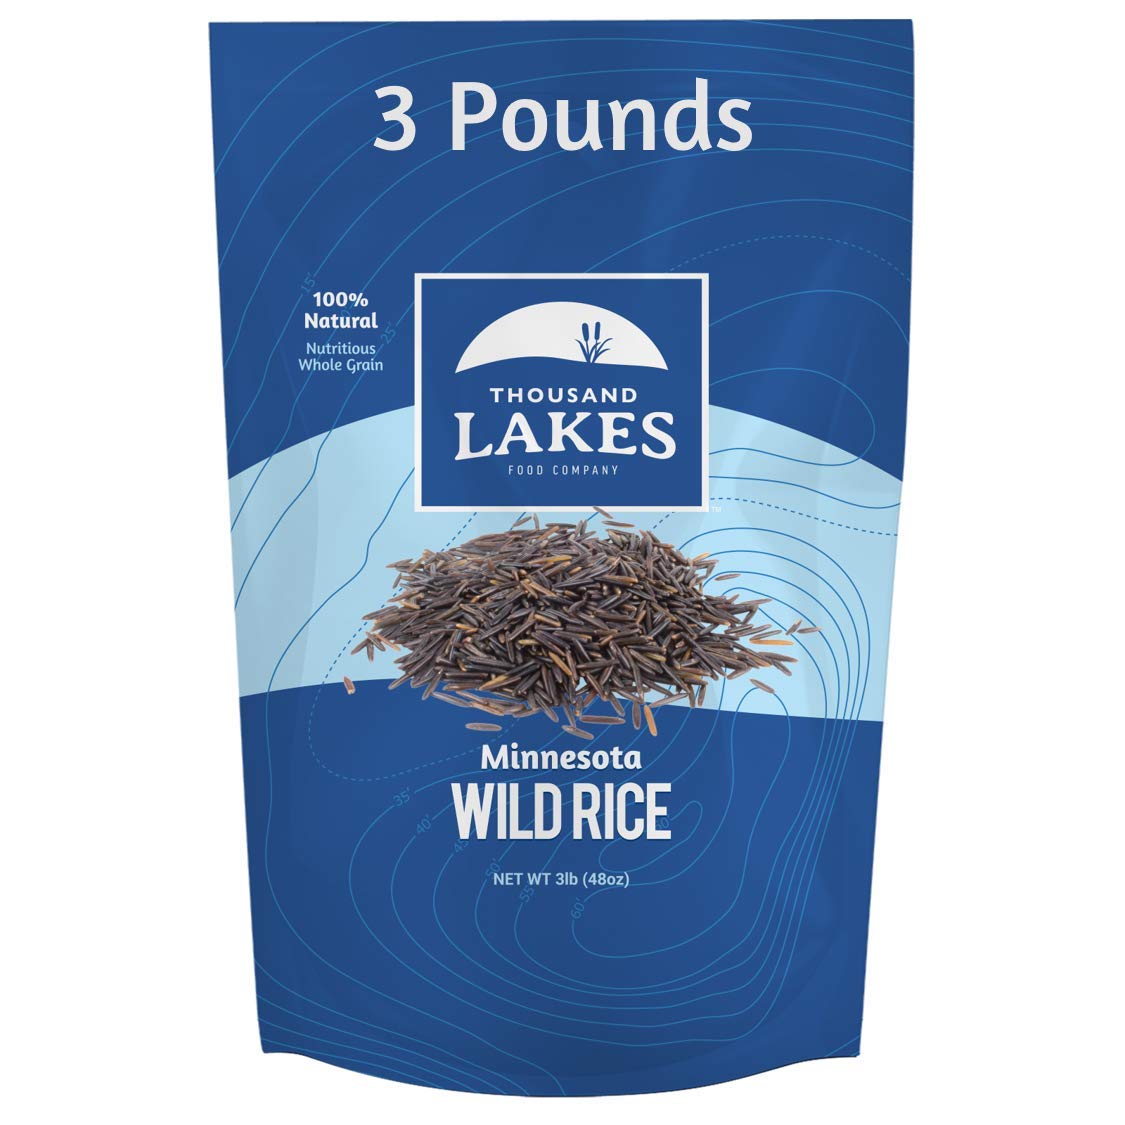 I had forgotten about wild rice but remembered recently and ordered this bag. Made some today and it was delicious. I'm focused on getting plenty of potassium in easy to consume food sources and this sure fits the bill, along with loads of other minerals and nutriments.I don't know the glycemic index but I can eat close to two cups at a time without getting the sleepies. Wild rice has the 2nd highest protein to carb ration after oats.